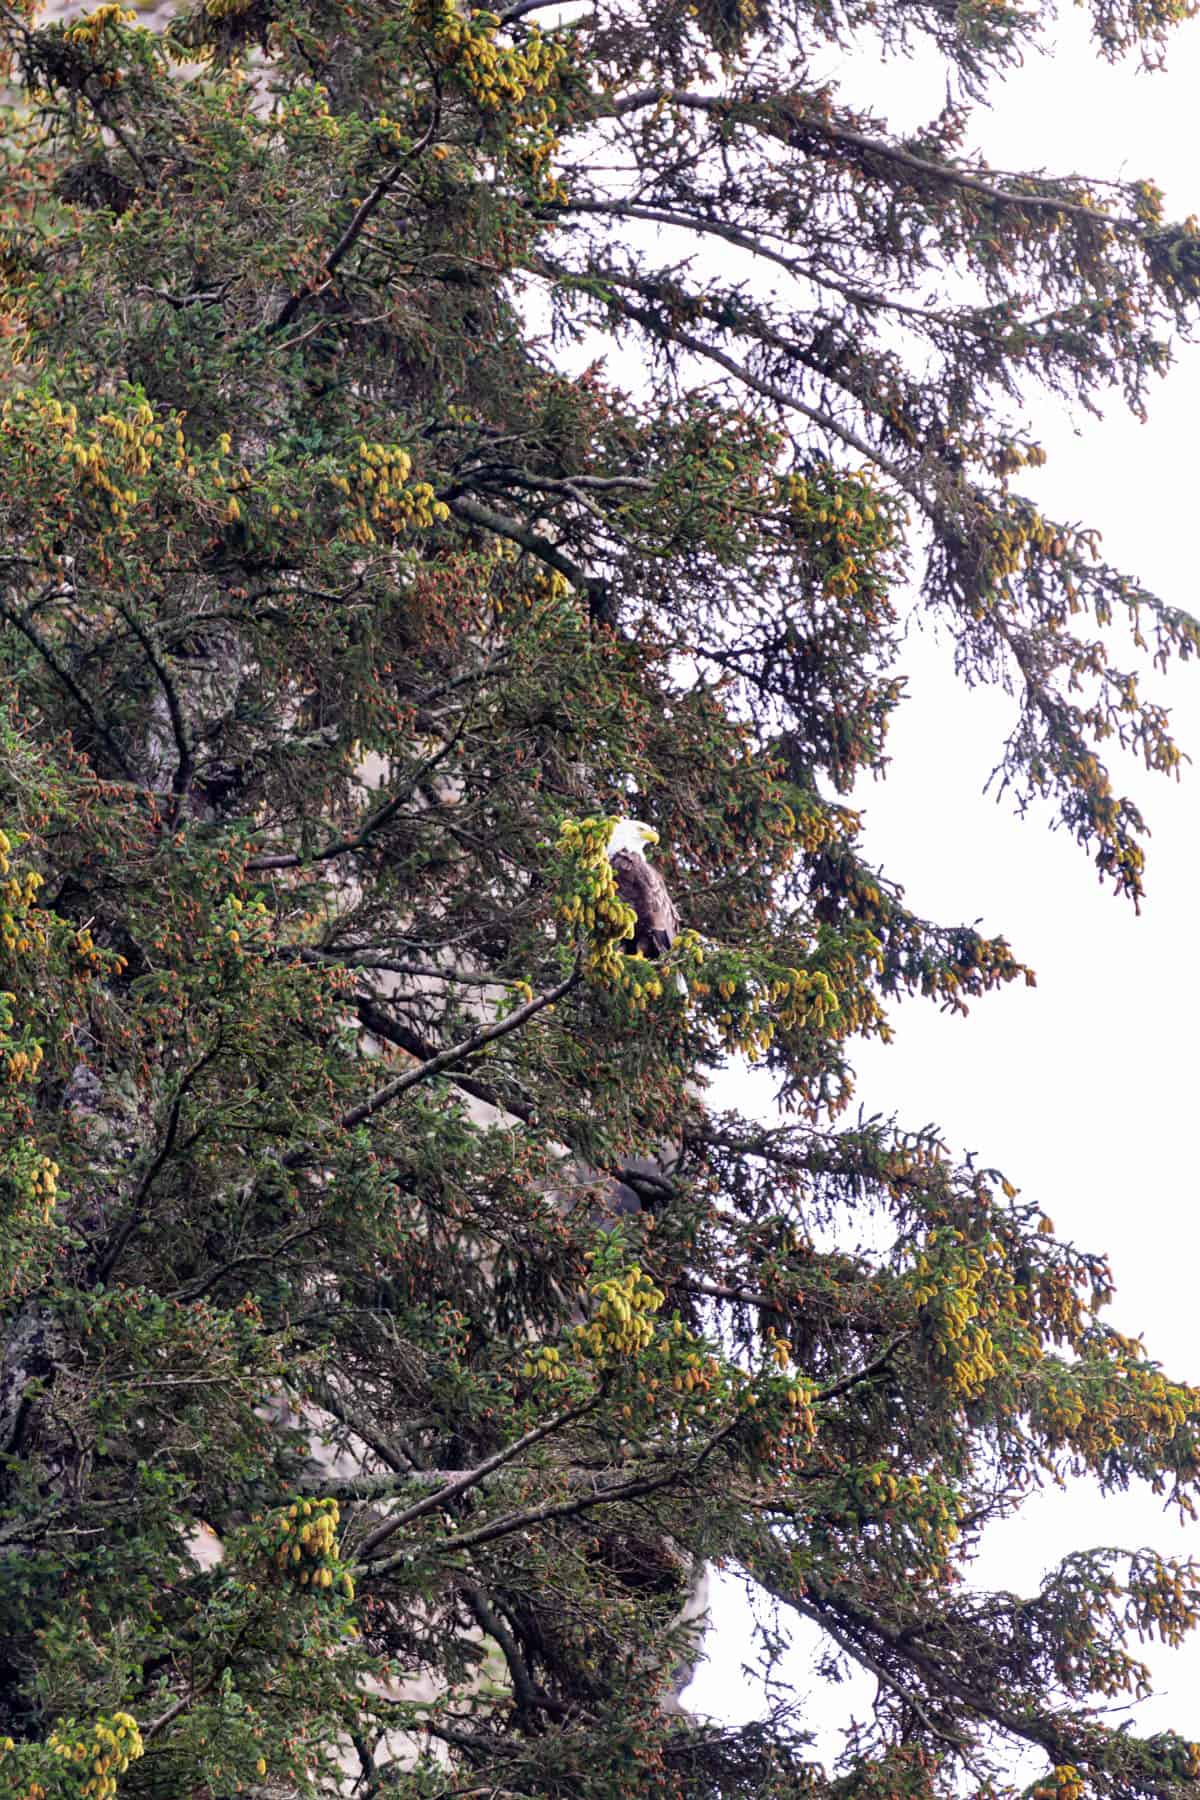 A bald eagle in a tree in Kenai Fjiords National Park.